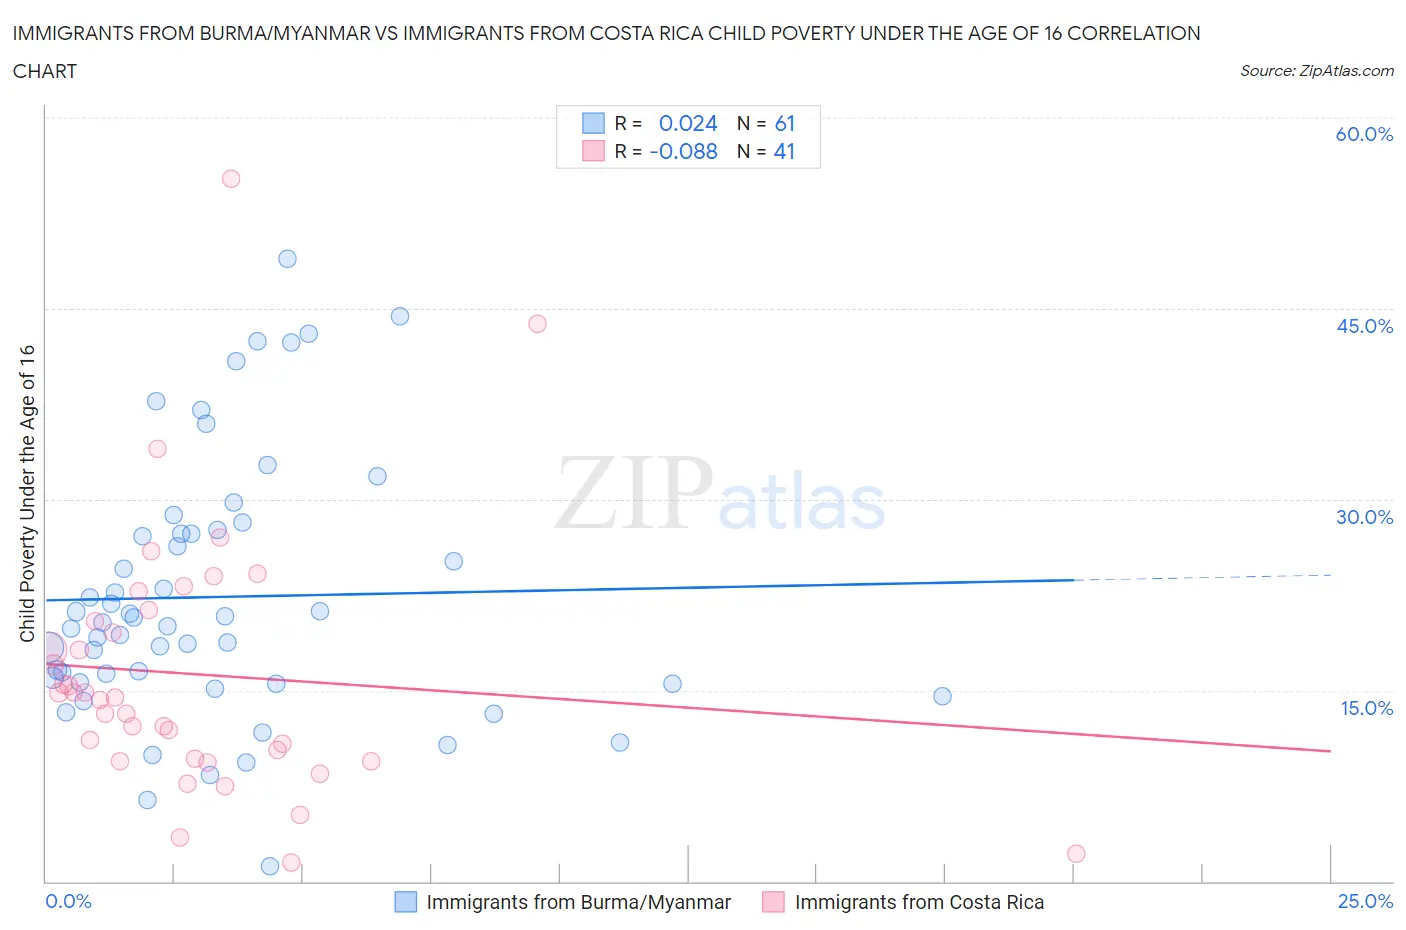 Immigrants from Burma/Myanmar vs Immigrants from Costa Rica Child Poverty Under the Age of 16